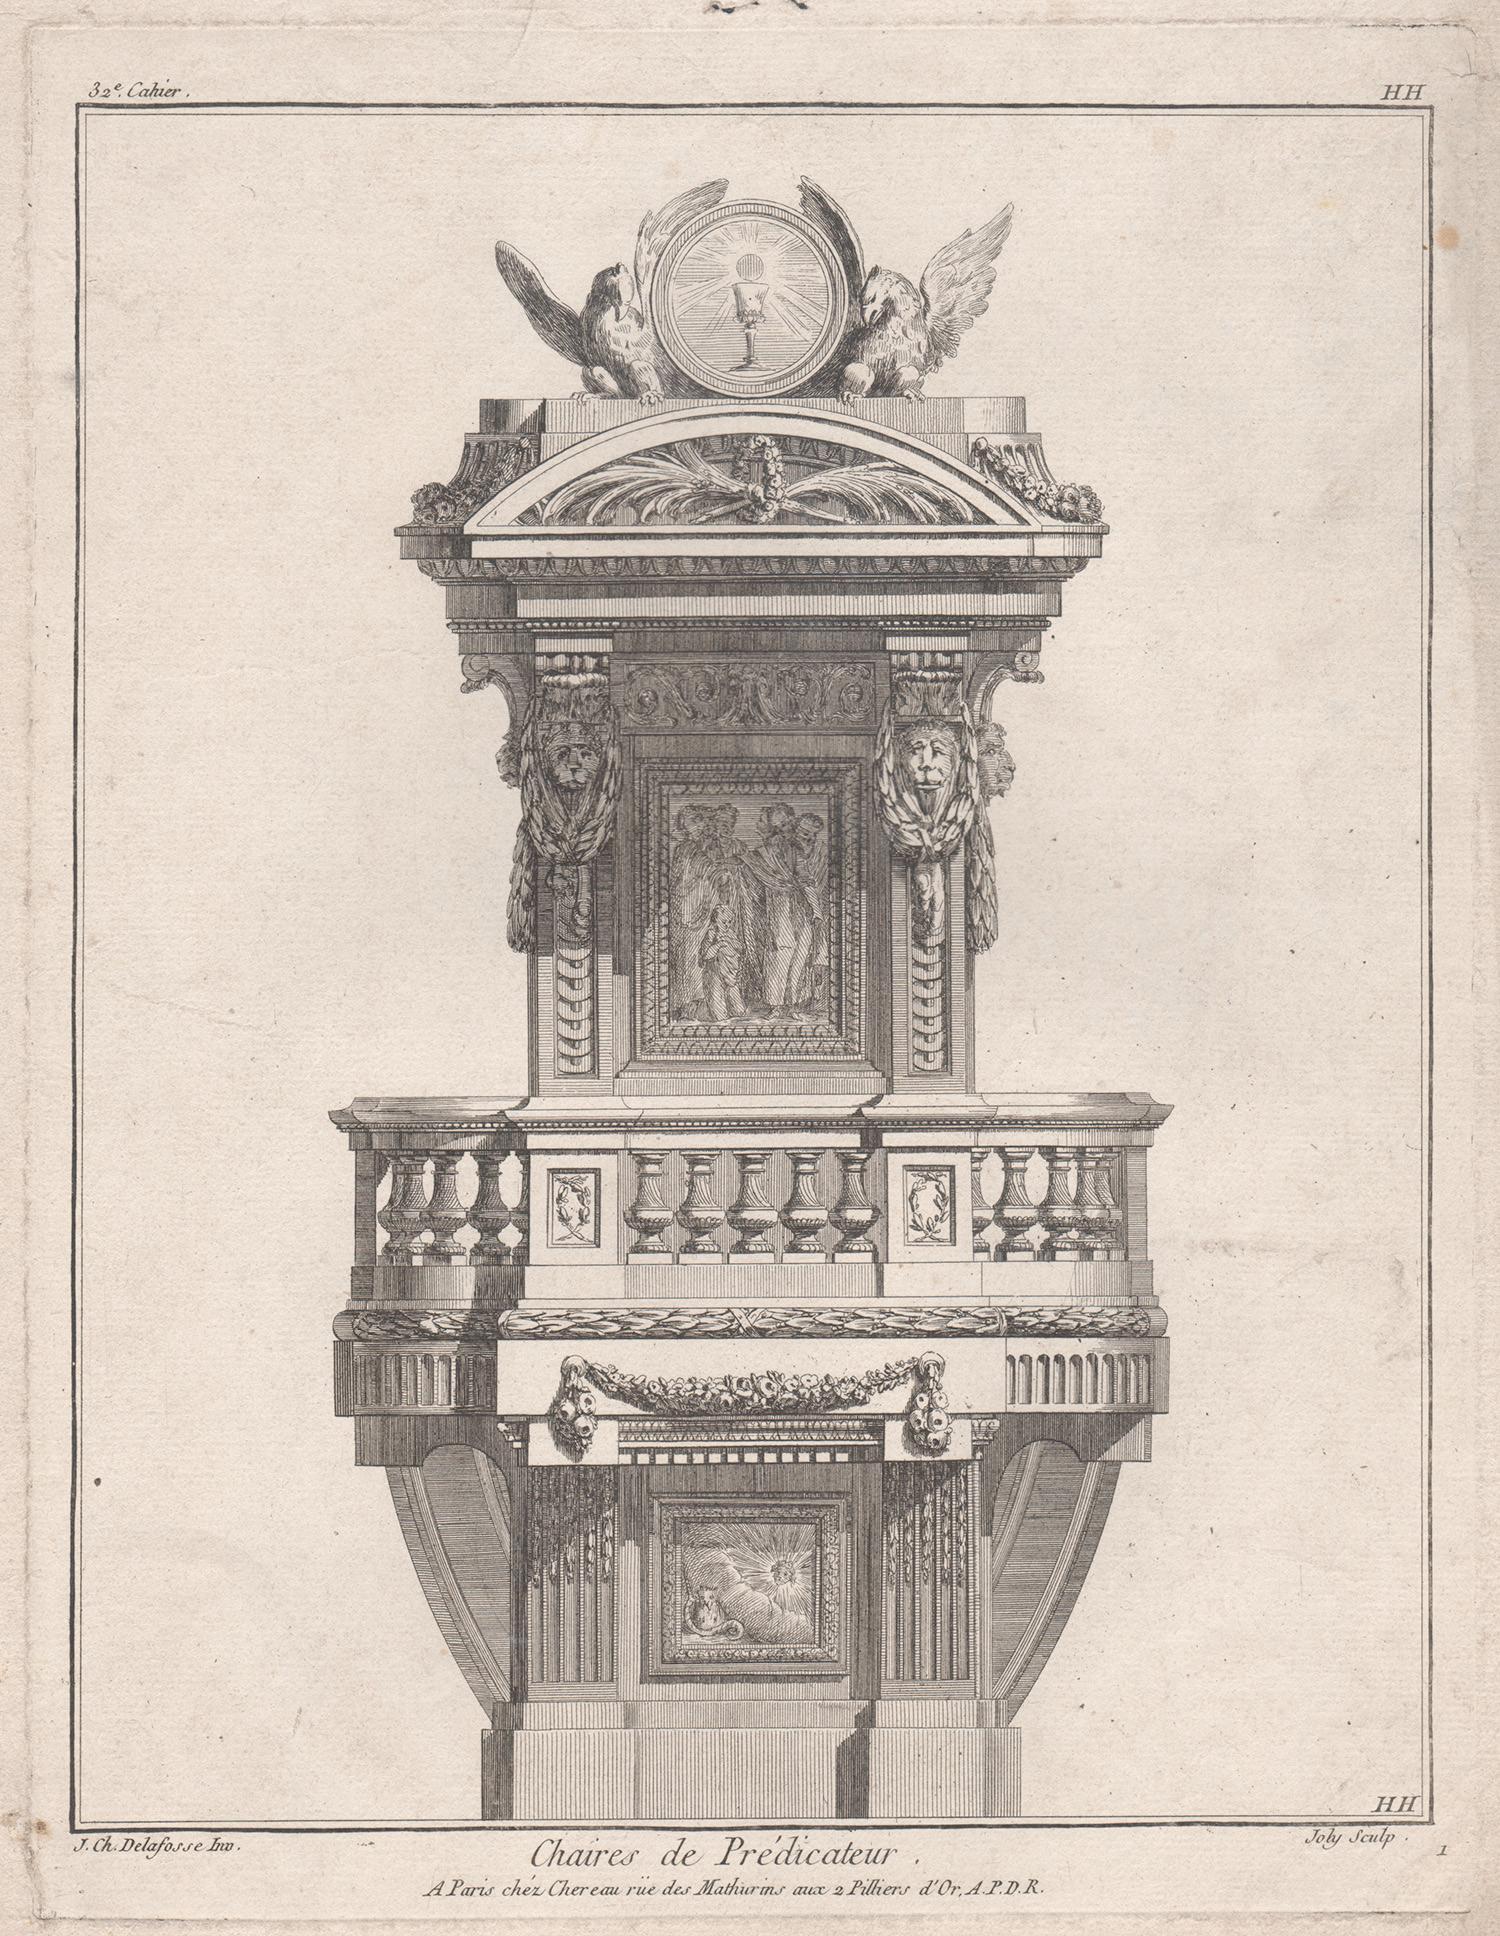 Joly after Jean-Charles Delafosse (1734-1791) Print - French Neoclassical design for a Pulpit, engraving after Delafosse